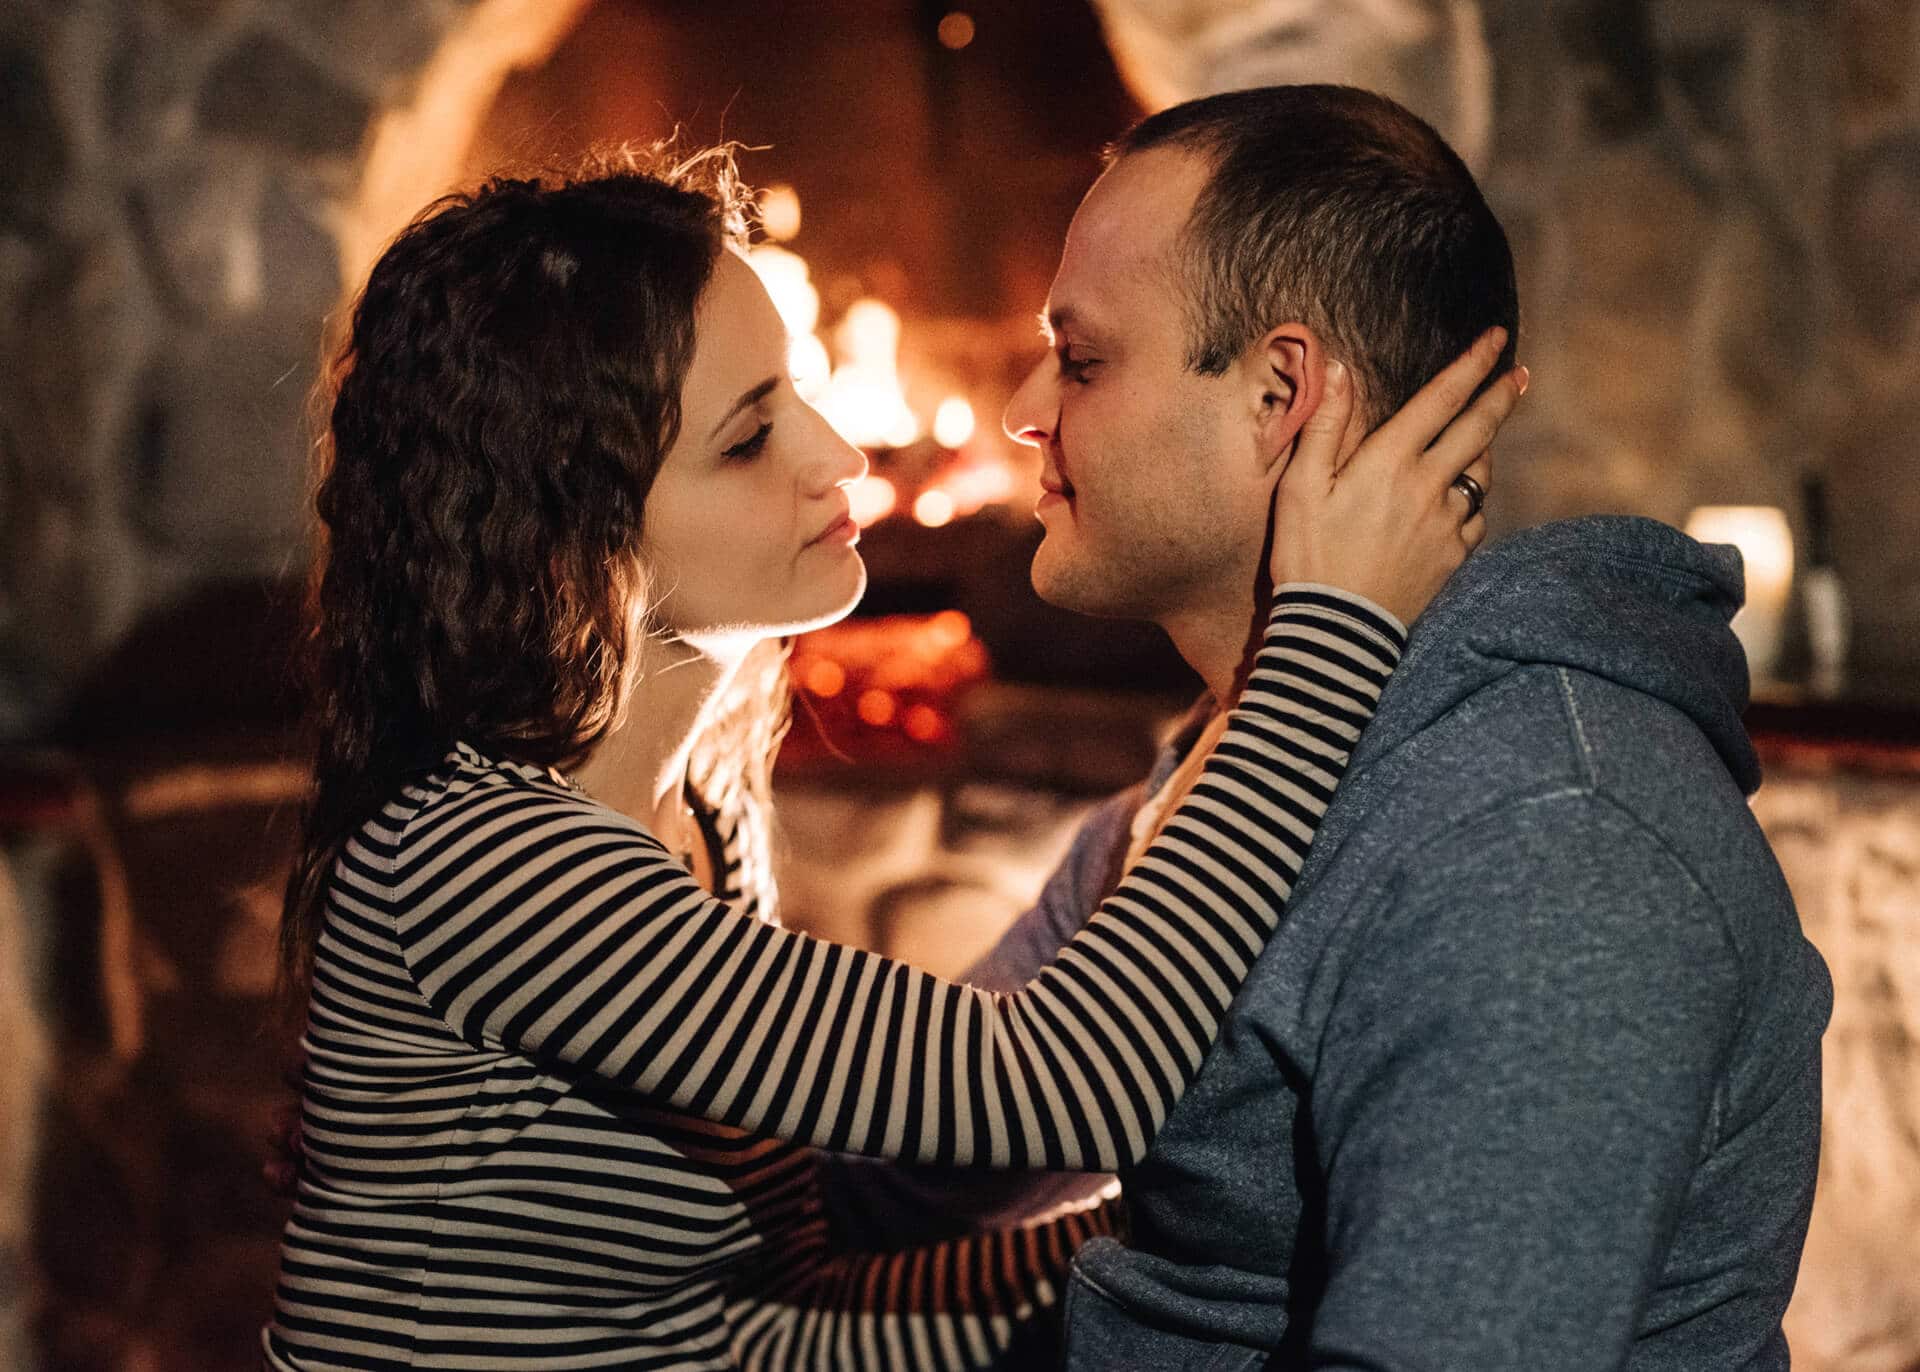 guy and girl are sitting at burning fireplace